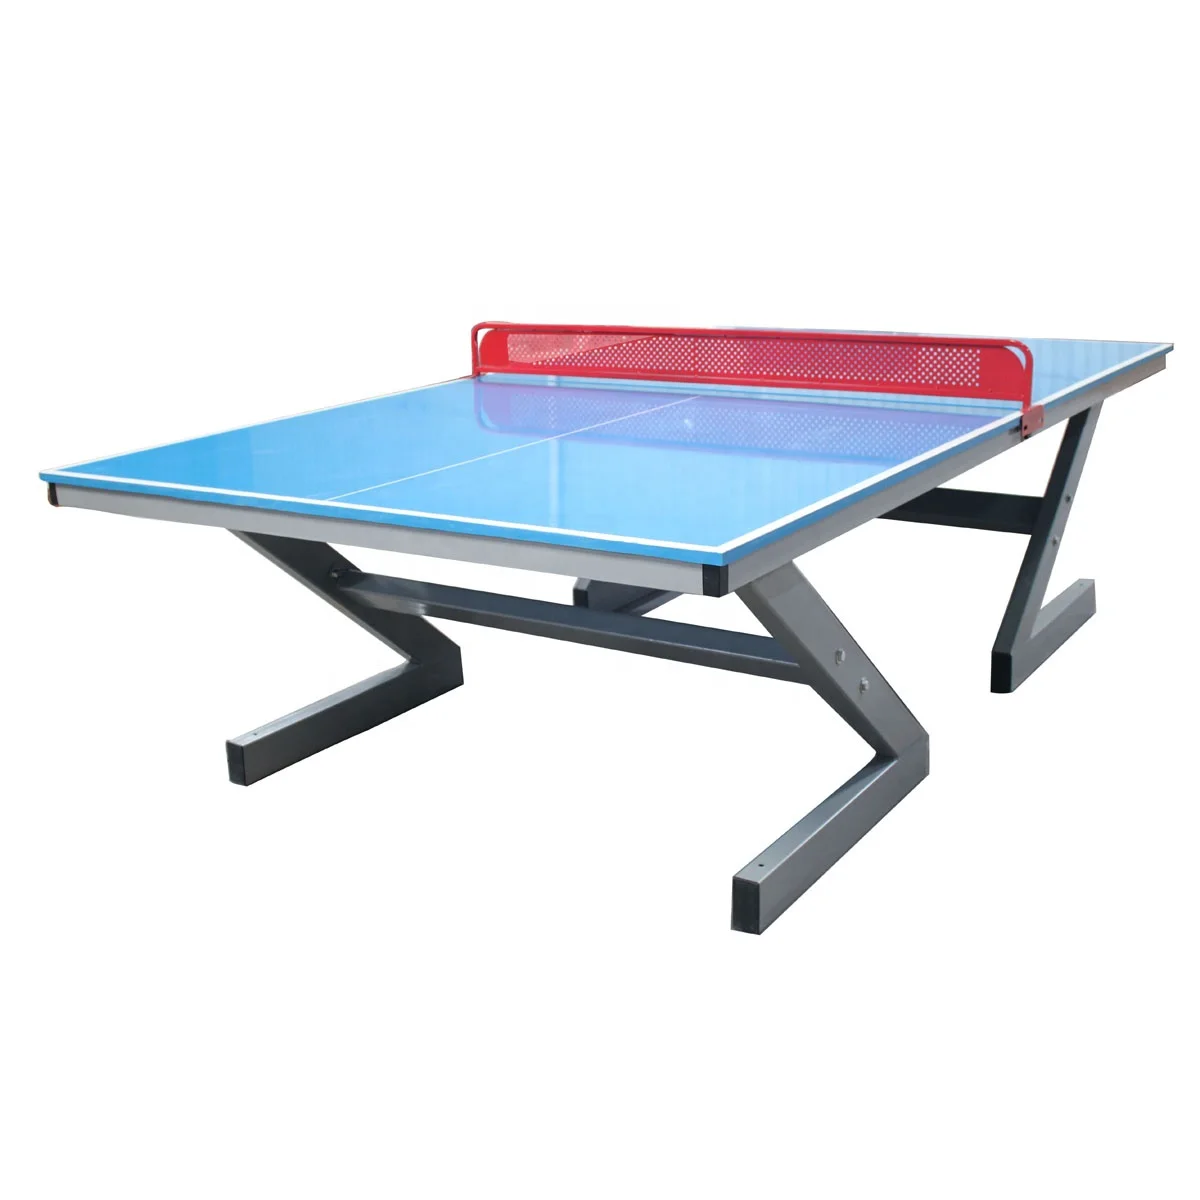 Ultimate Outdoor Fiberglass Top Table Tennis Tables / Ping Pong Table Outdoor Fitness Equipment - Buy Table Tennis Equipment,Ping Pong Table Outdoor,Table Tennis Tables Product on Alibaba.com